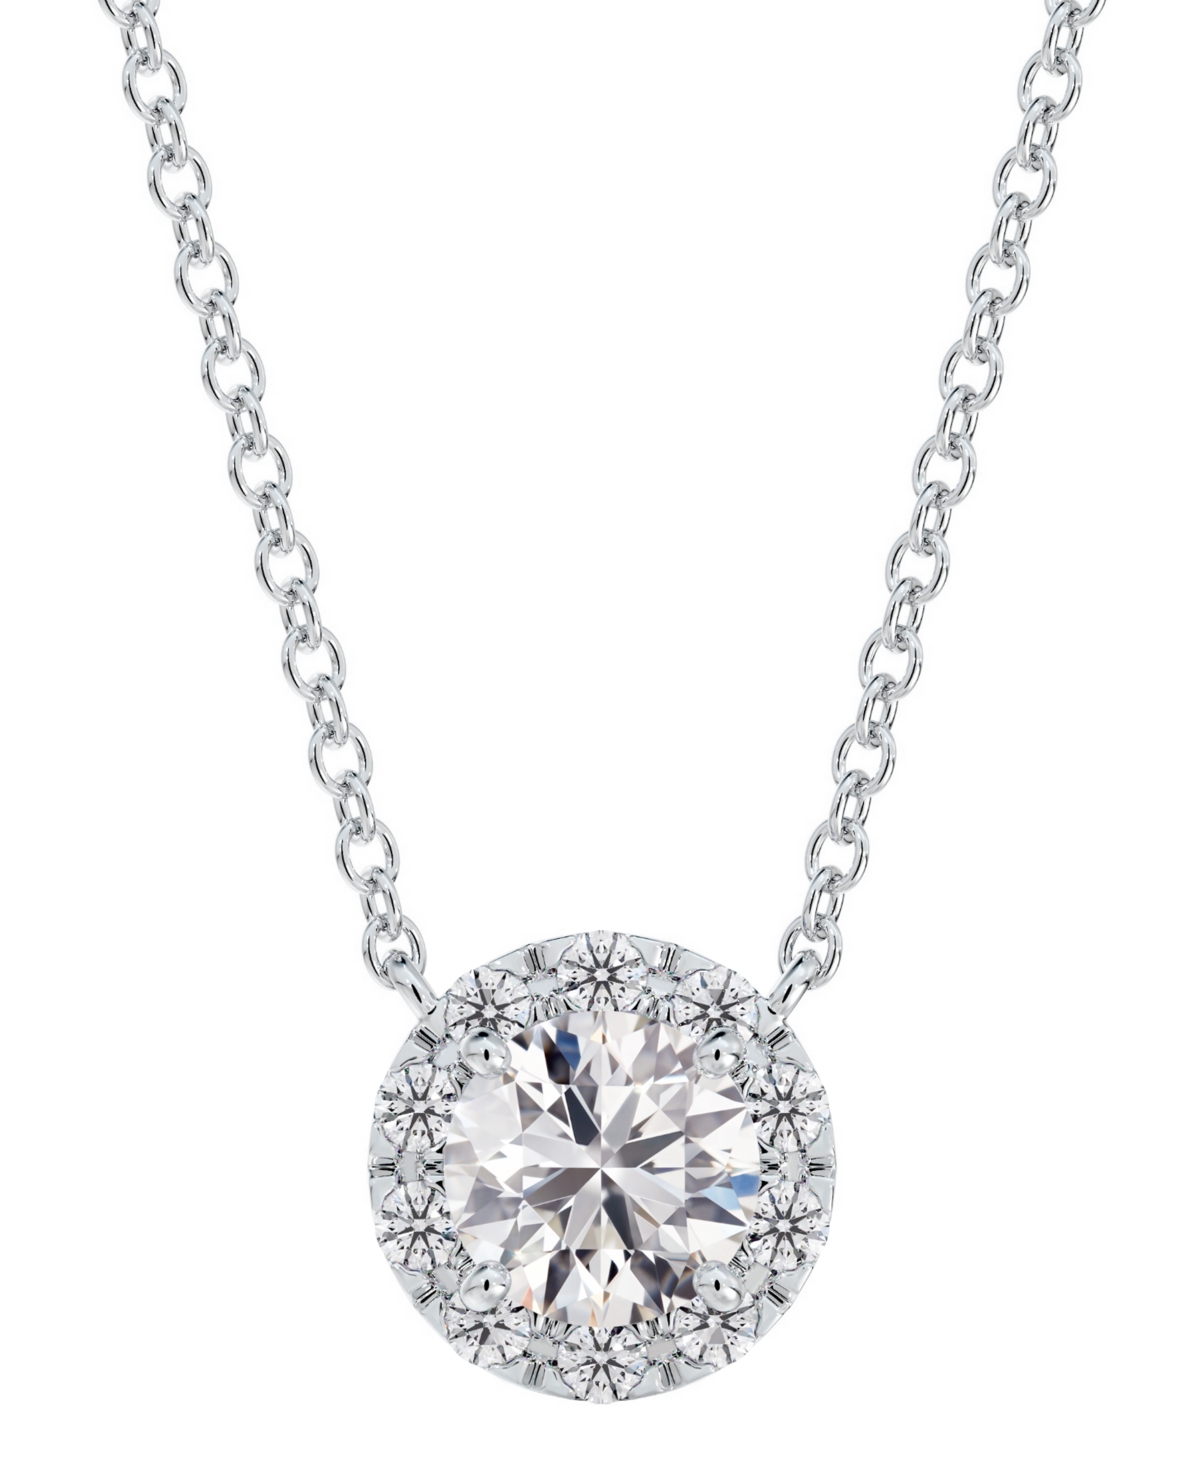 De Beers Forevermark Portfolio by De Beers Forevermark Diamond Halo Pendant Necklace (1/2 ct. t.w.) in 14k White or Yellow Gold, 16" + 2" extender